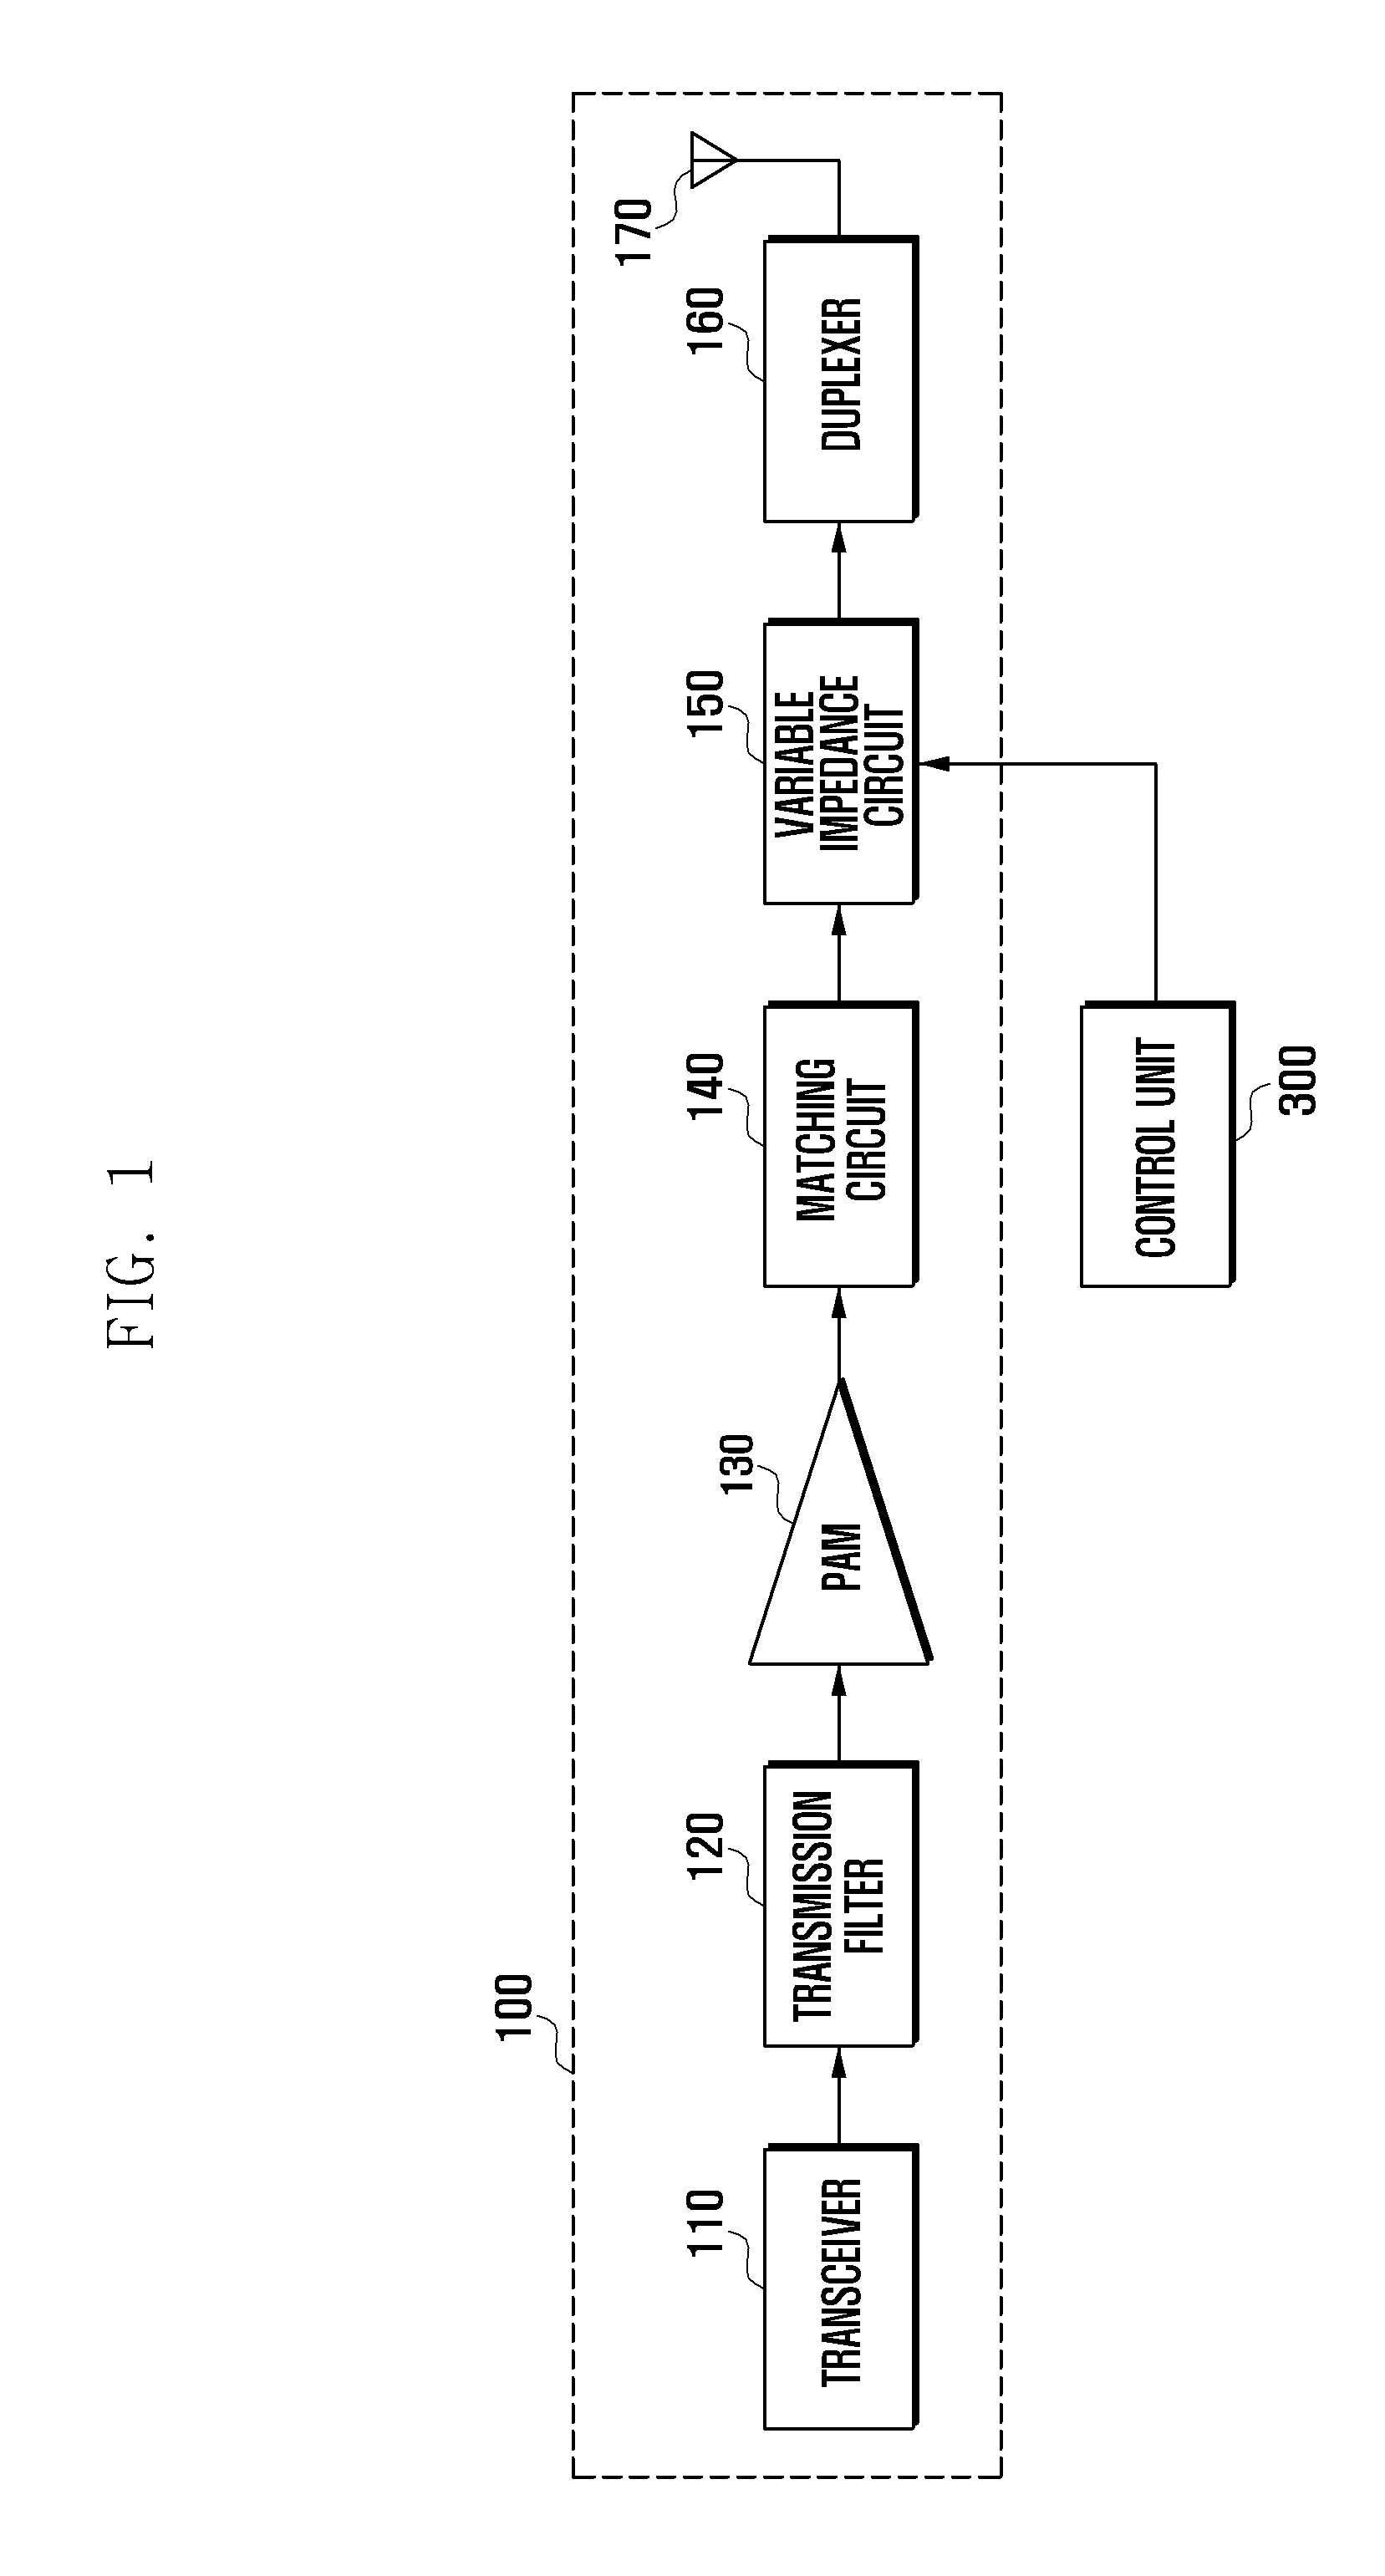 Method and apparatus for optimizing radio frequency transmission performance in adaptation to network environment